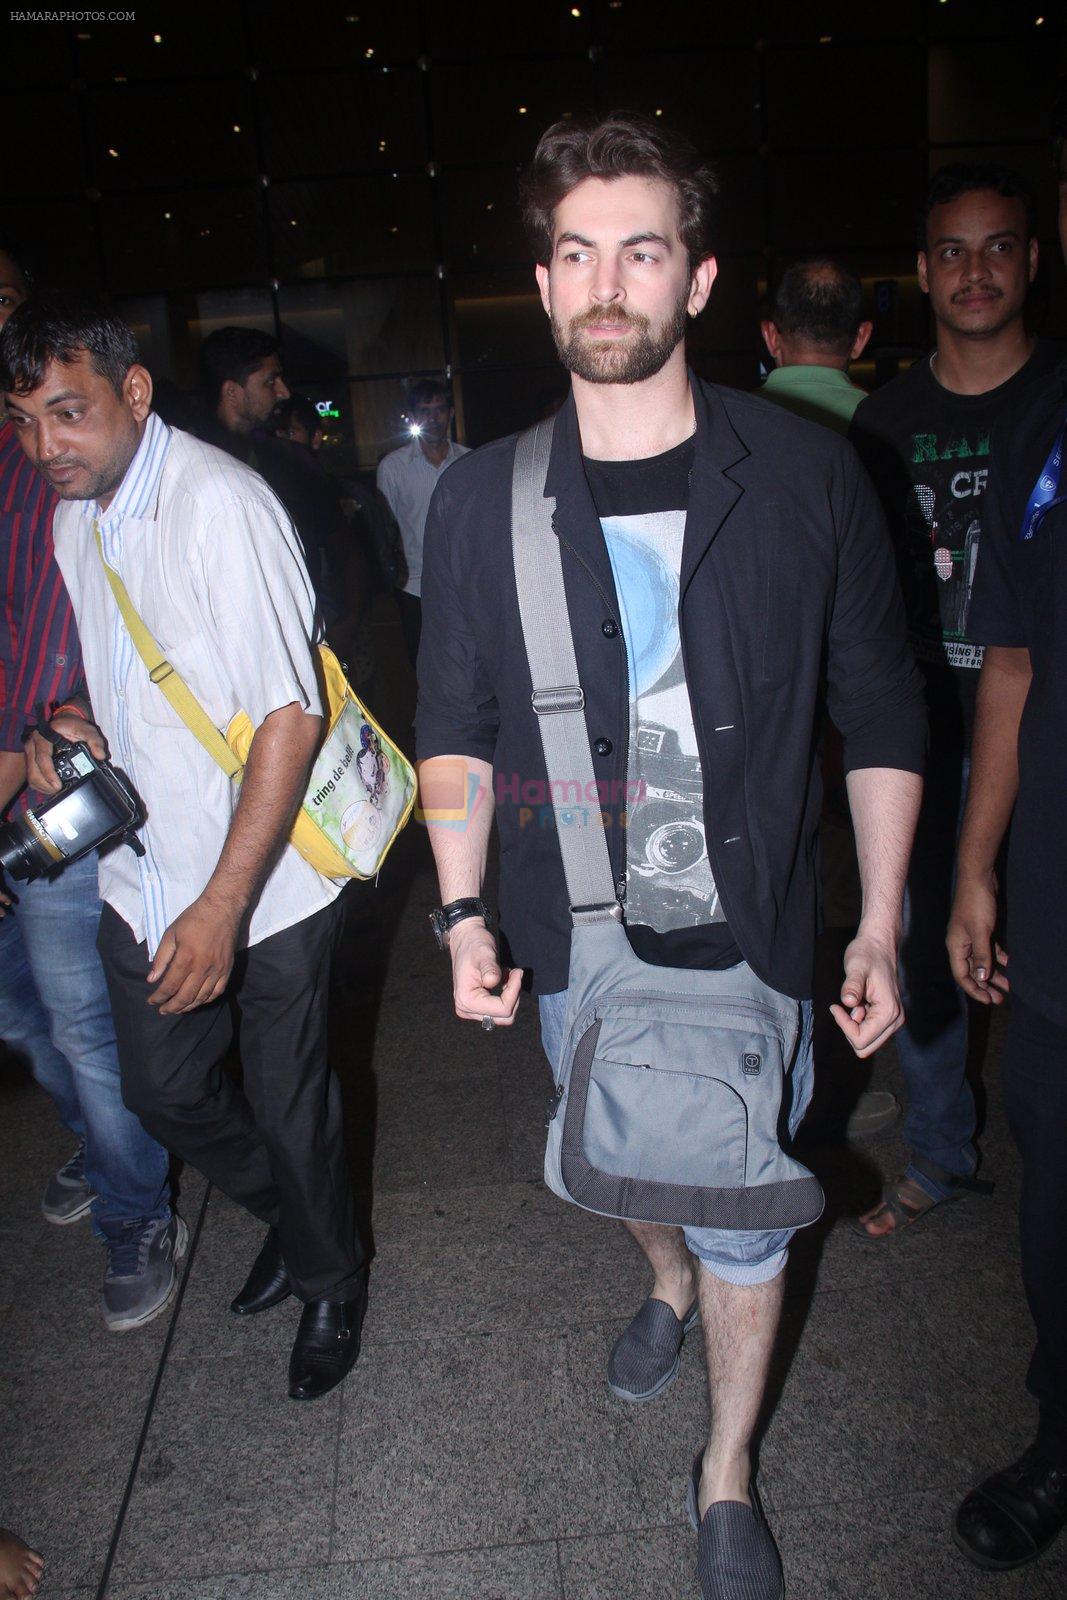 Neil Nitin Mukesh at the airport on June 26, 2016